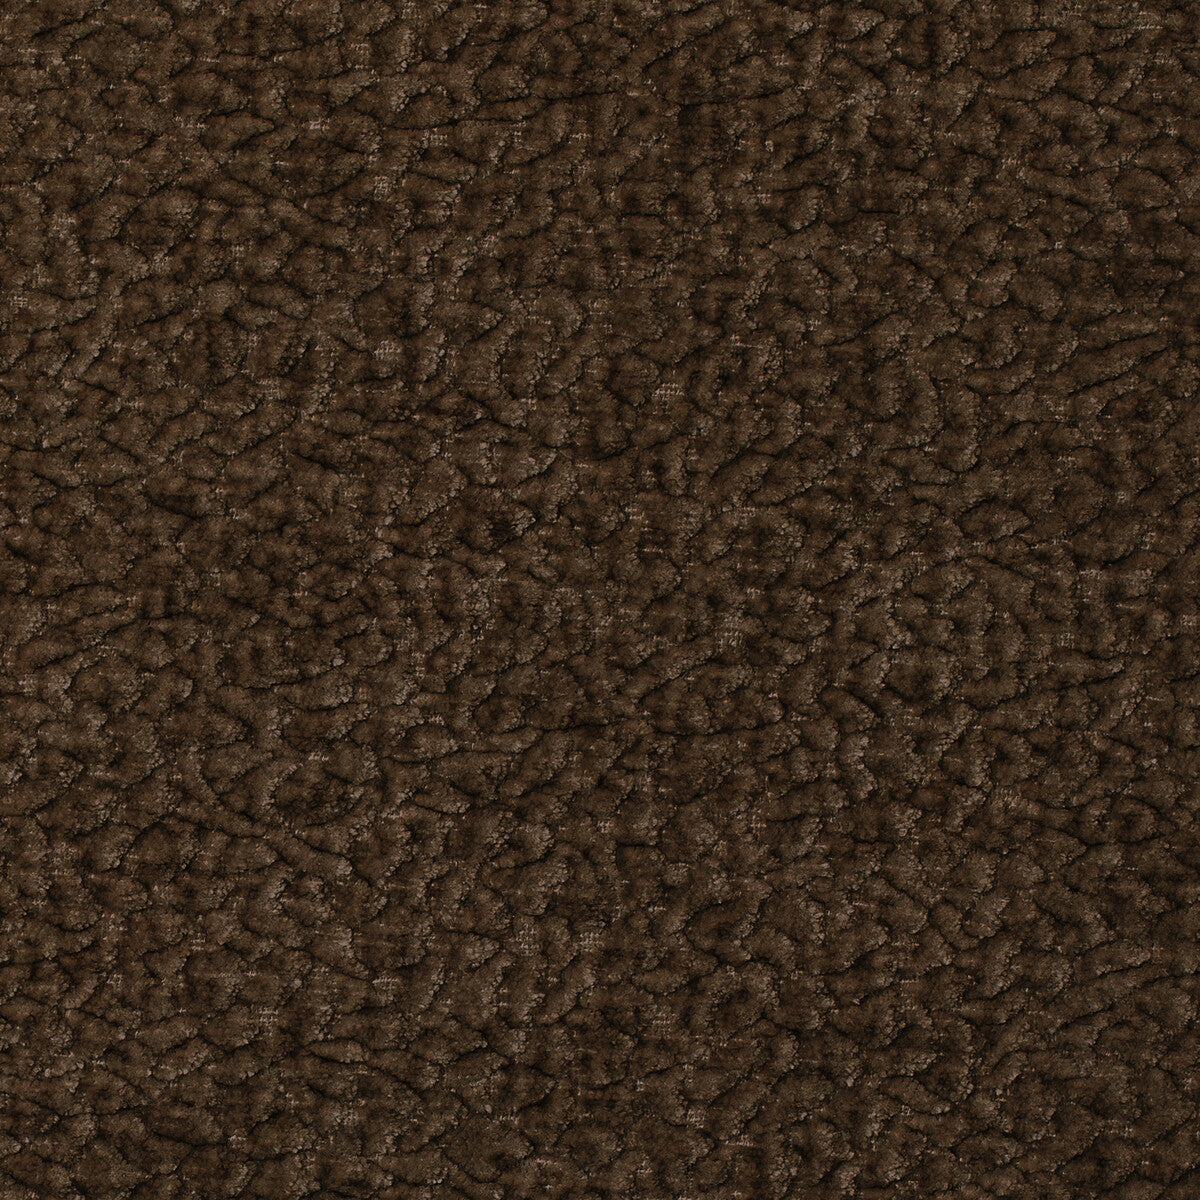 Barton Chenille fabric in coffee color - pattern 36074.6.0 - by Kravet Smart